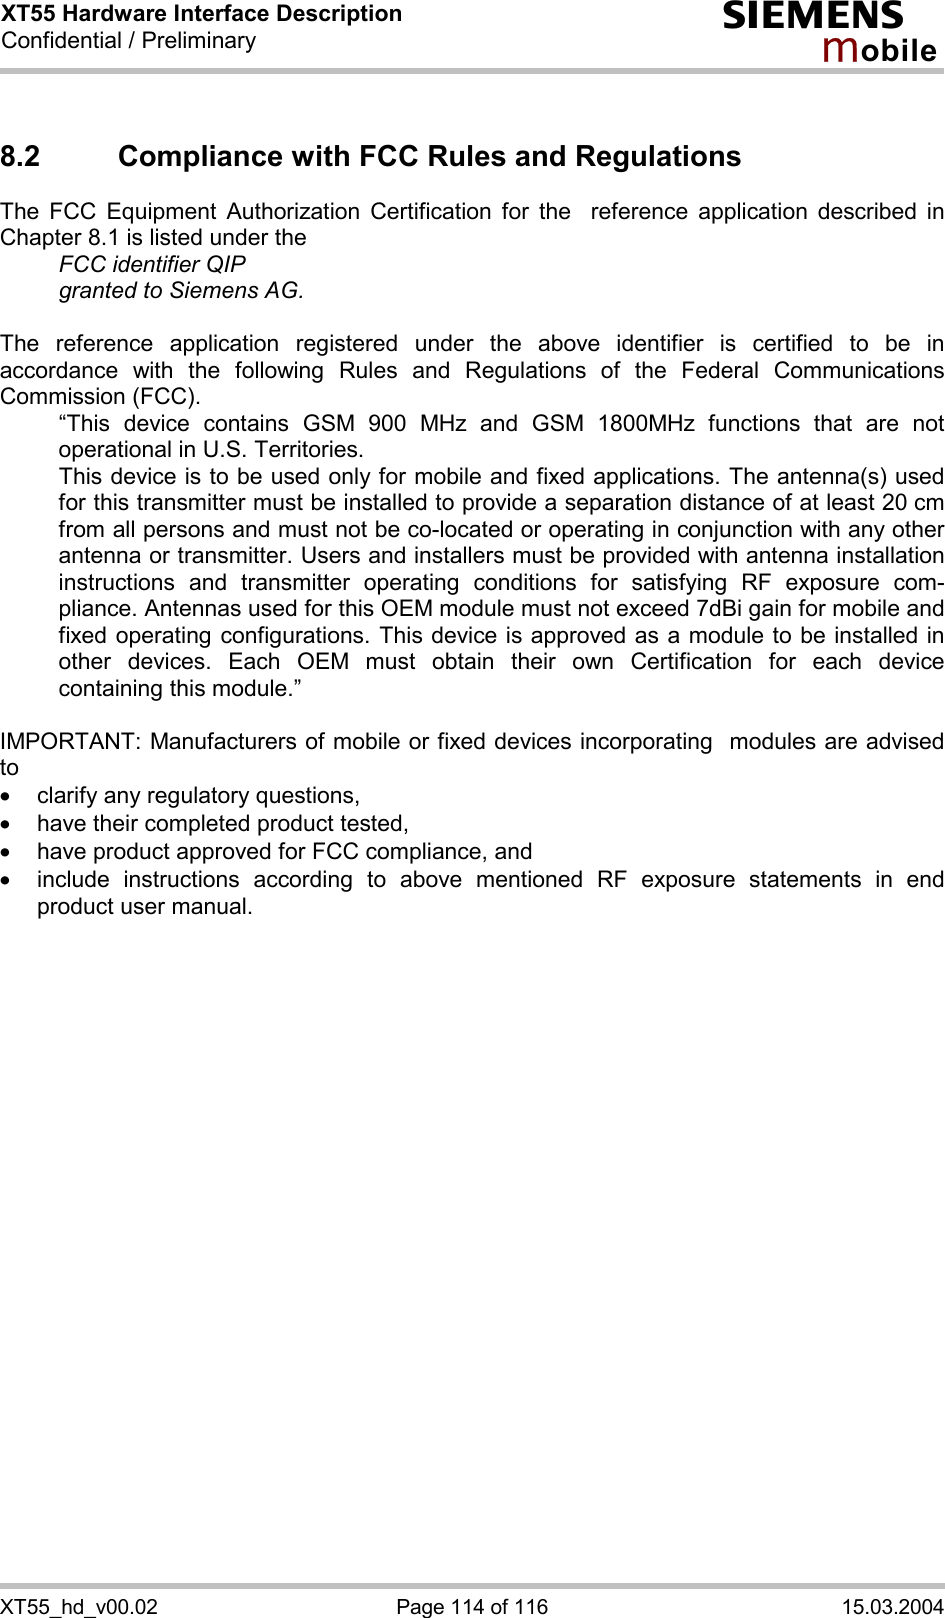 XT55 Hardware Interface Description Confidential / Preliminary s mo b i l e XT55_hd_v00.02  Page 114 of 116  15.03.2004 8.2  Compliance with FCC Rules and Regulations  The FCC Equipment Authorization Certification for the  reference application described in Chapter 8.1 is listed under the   FCC identifier QIP   granted to Siemens AG.   The reference application registered under the above identifier is certified to be in accordance with the following Rules and Regulations of the Federal Communications Commission (FCC).    “This device contains GSM 900 MHz and GSM 1800MHz functions that are not operational in U.S. Territories.    This device is to be used only for mobile and fixed applications. The antenna(s) used for this transmitter must be installed to provide a separation distance of at least 20 cm from all persons and must not be co-located or operating in conjunction with any other antenna or transmitter. Users and installers must be provided with antenna installation instructions and transmitter operating conditions for satisfying RF exposure com-pliance. Antennas used for this OEM module must not exceed 7dBi gain for mobile and fixed operating configurations. This device is approved as a module to be installed in other devices. Each OEM must obtain their own Certification for each device containing this module.”  IMPORTANT: Manufacturers of mobile or fixed devices incorporating  modules are advised to ·  clarify any regulatory questions, ·  have their completed product tested, ·  have product approved for FCC compliance, and ·  include instructions according to above mentioned RF exposure statements in end product user manual.    